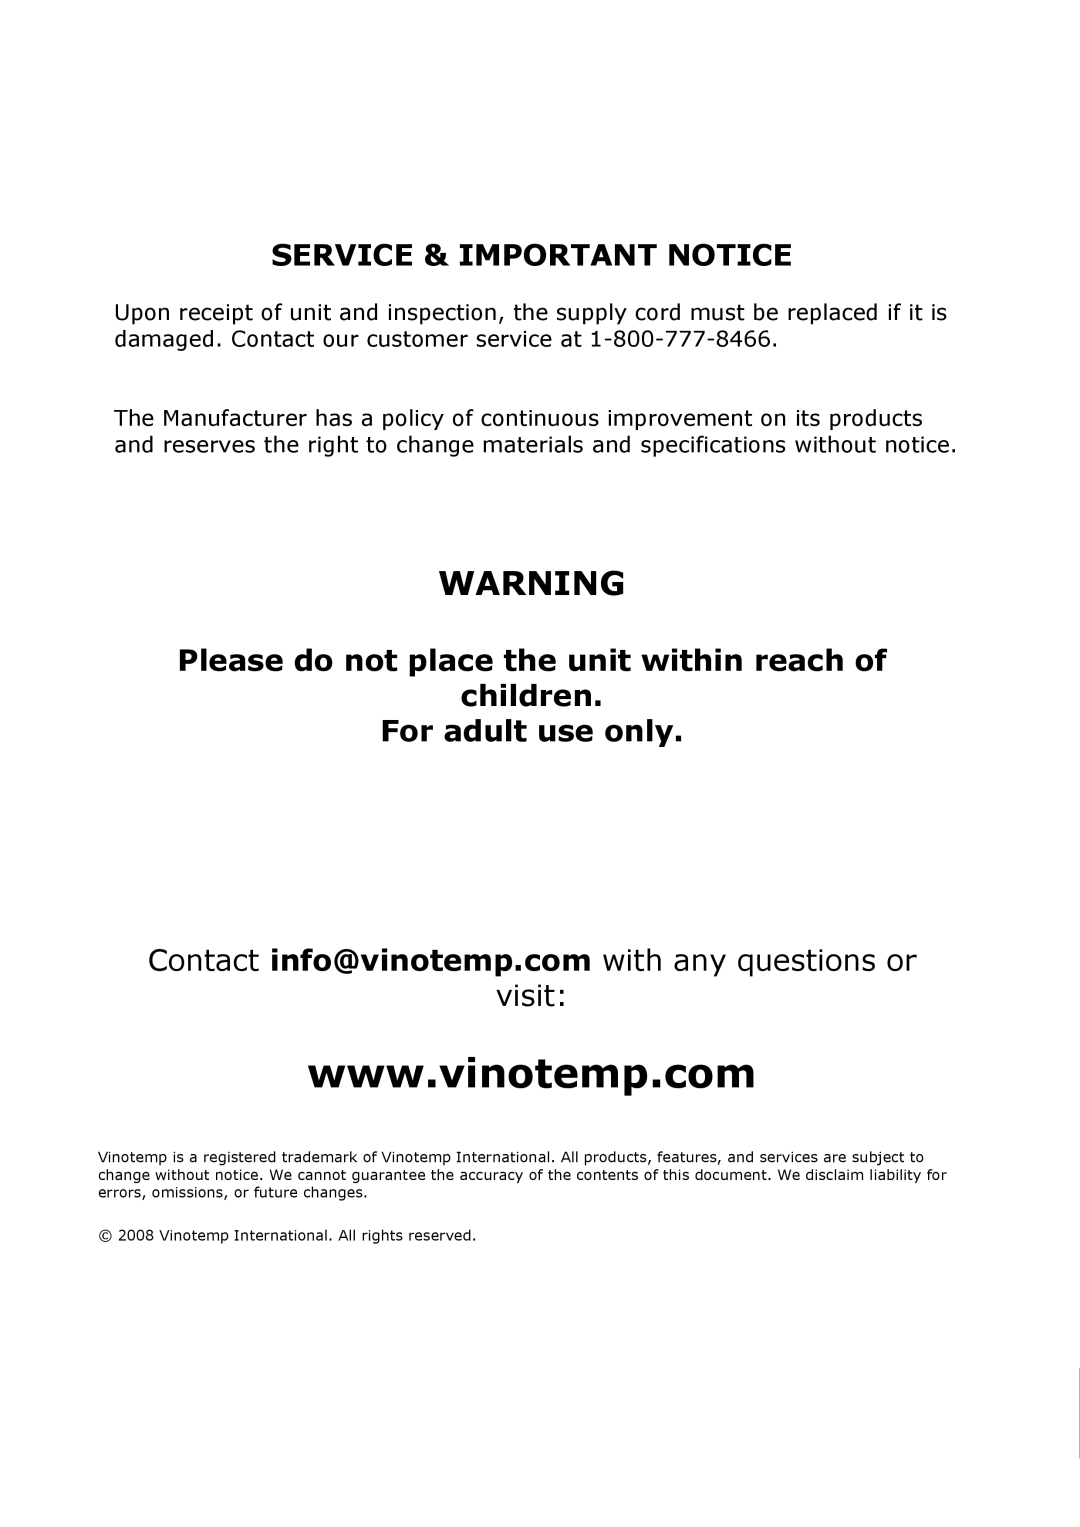 Vinotemp VT-45R Service & Important Notice, Please do not place the unit within reach of, children For adult use only 